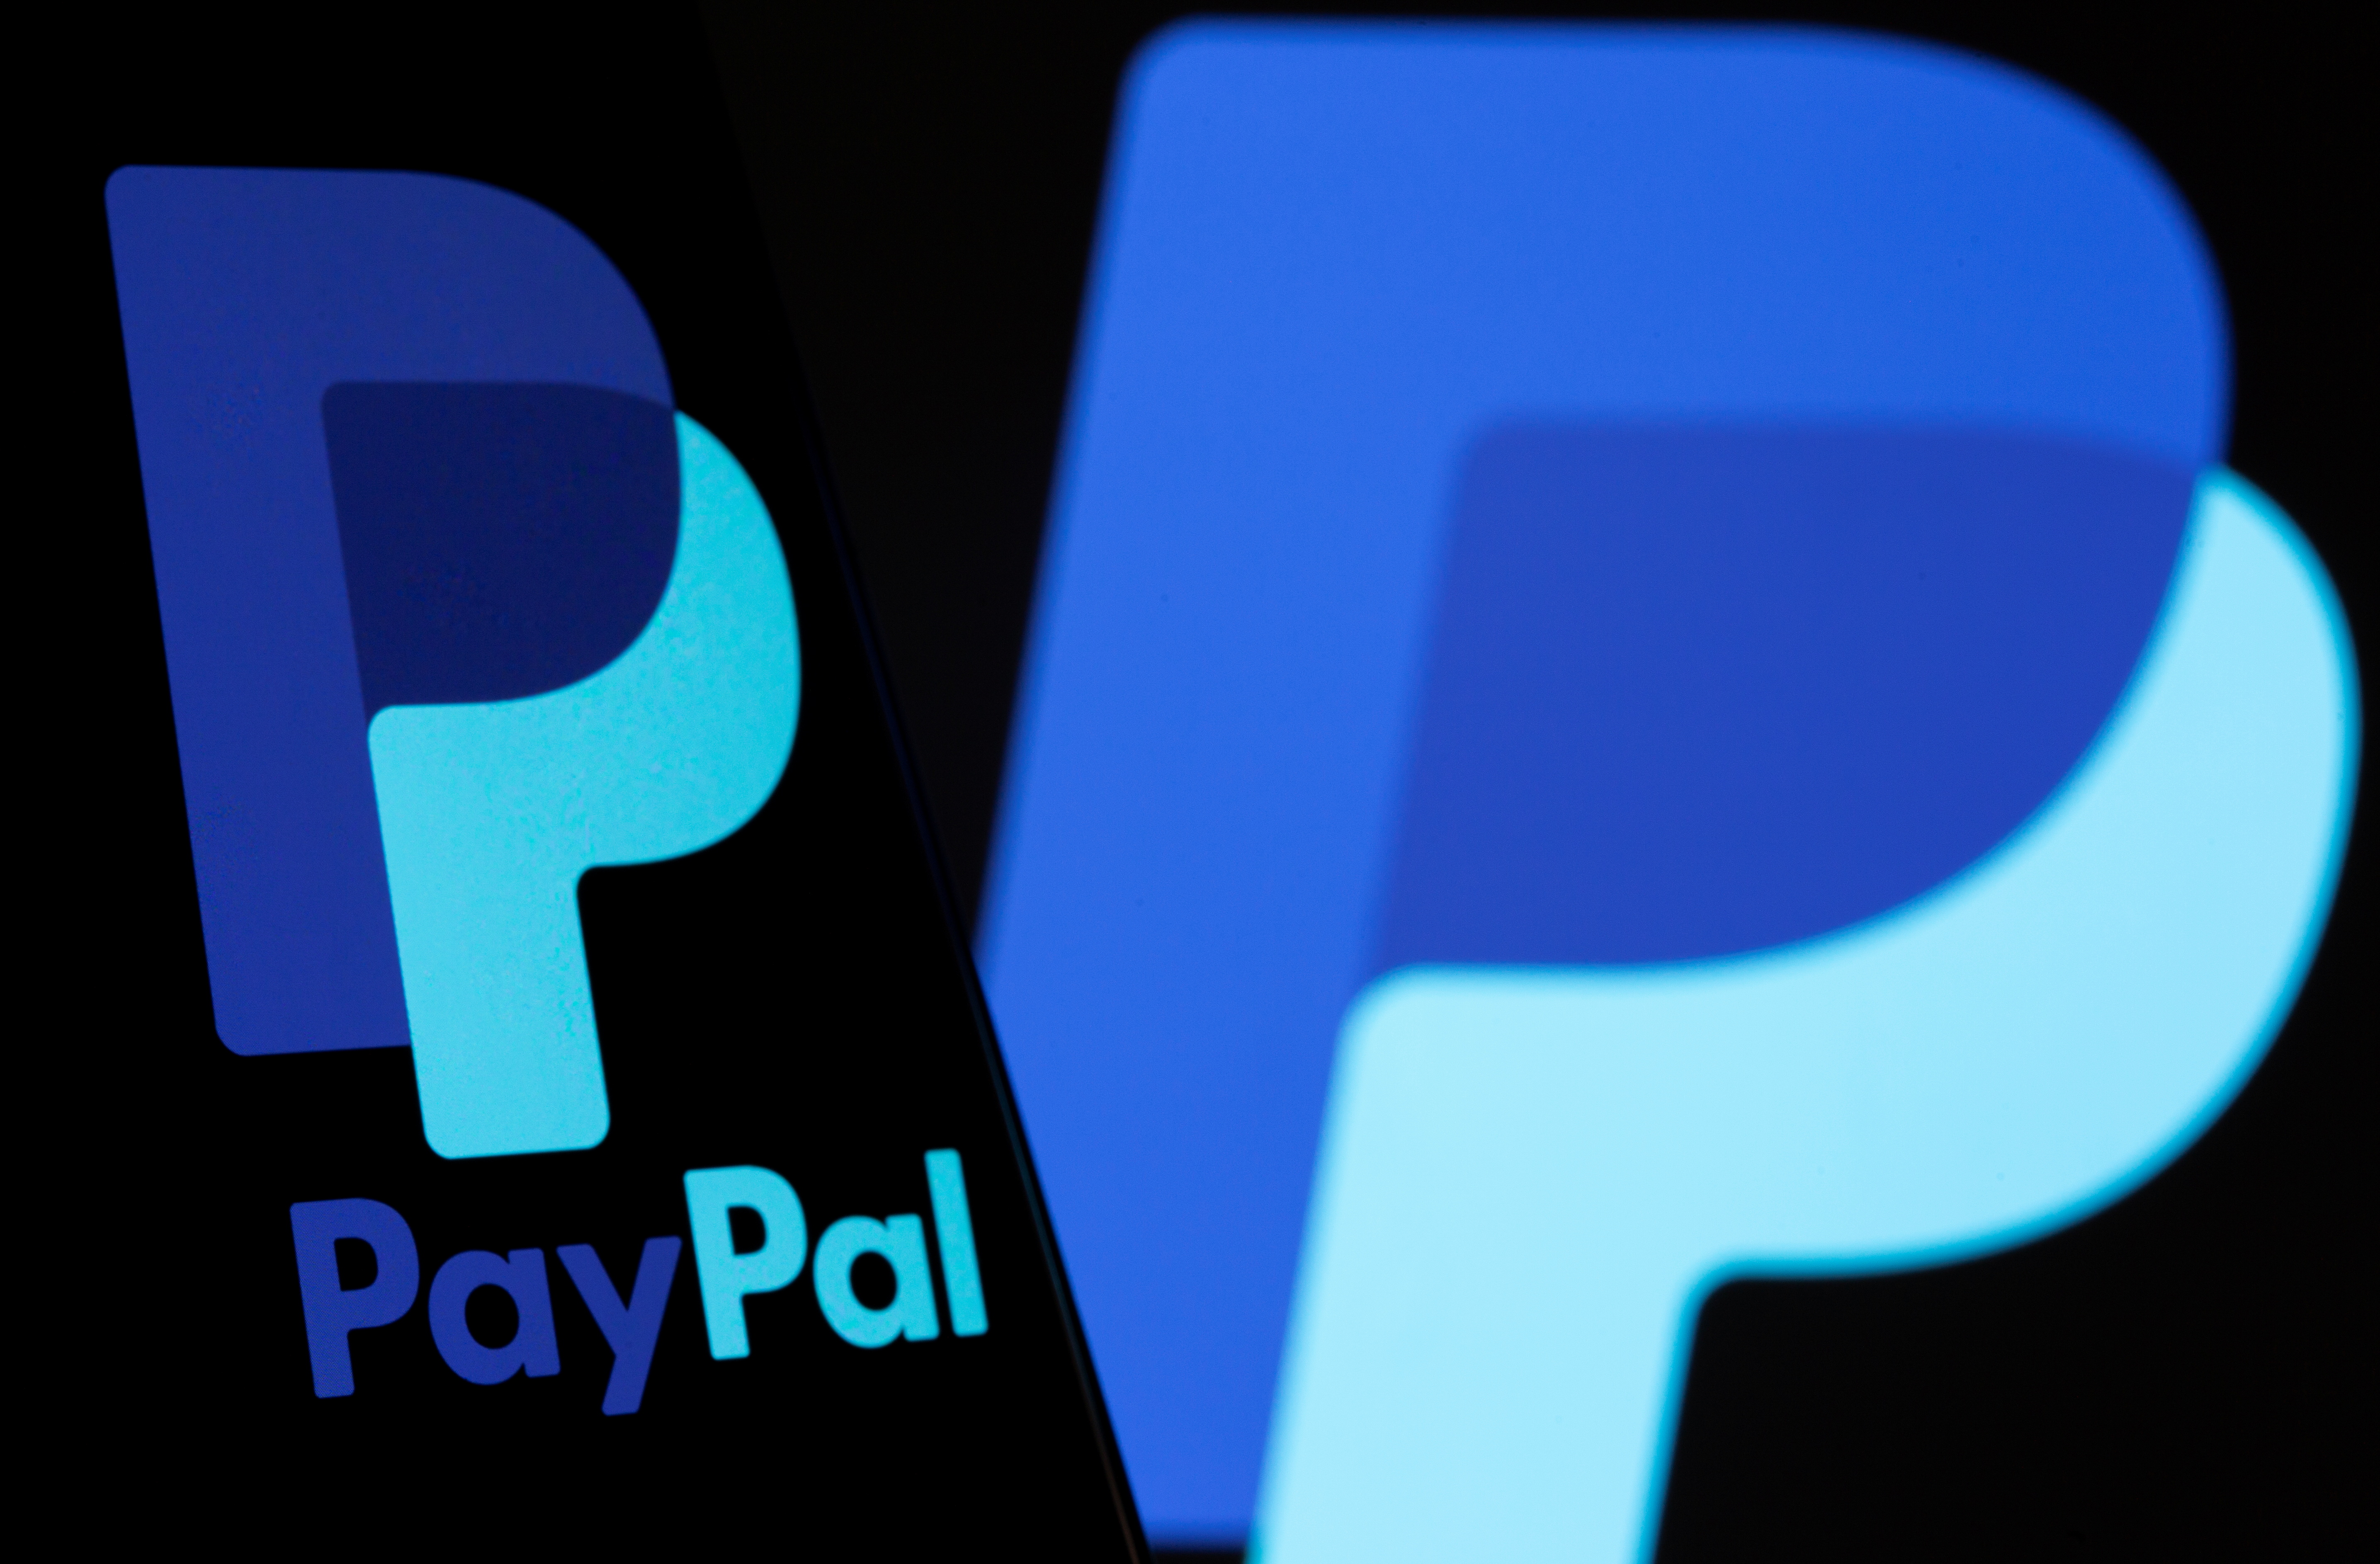 The PayPal logo is seen on a smartphone in front of the same logo shown in this illustration